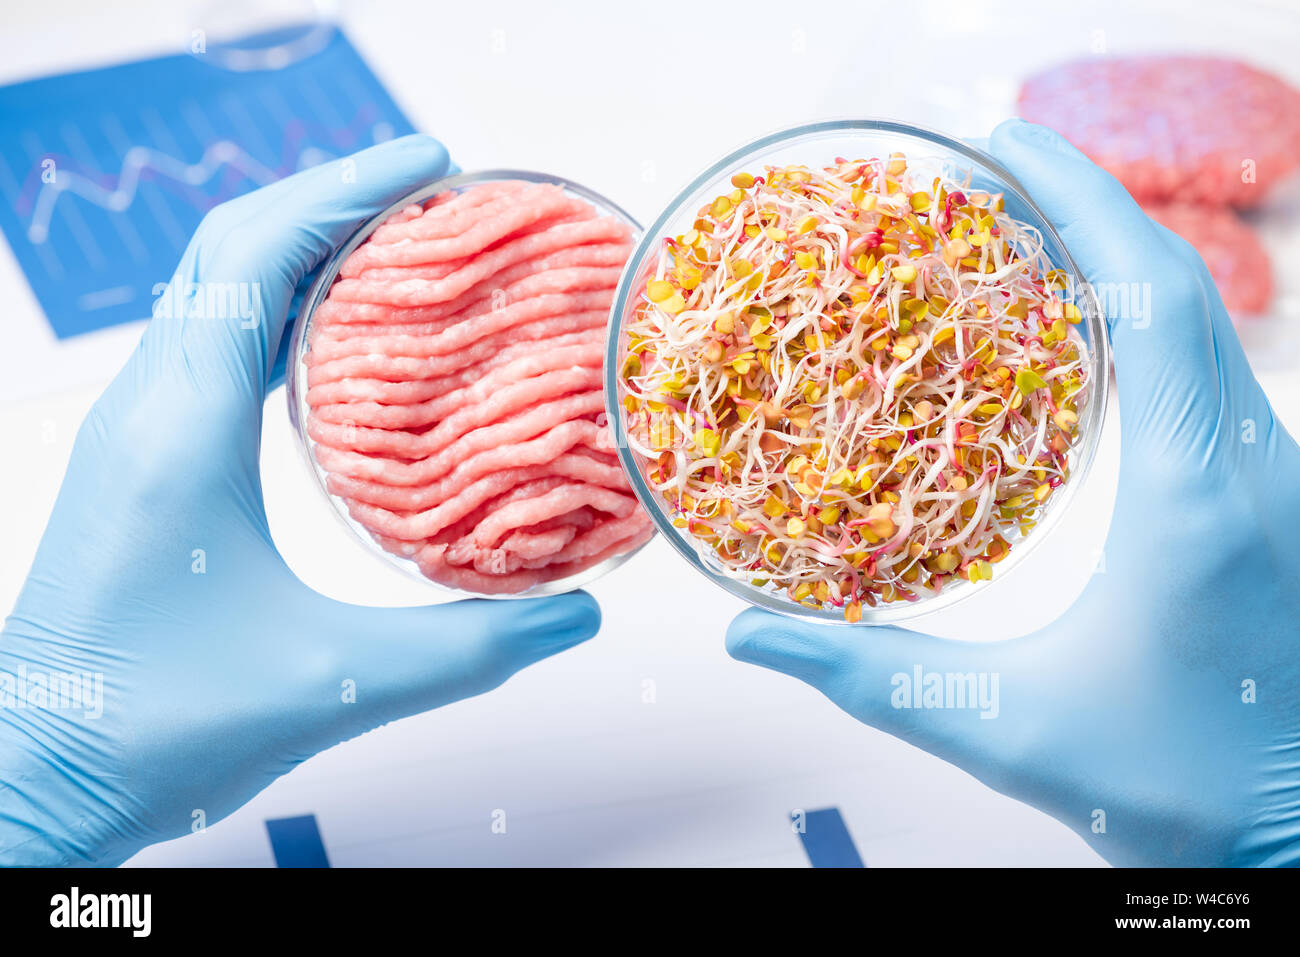 Scientist showing plant material in Petri dish for preparing lab cruelty free meat substitute Stock Photo